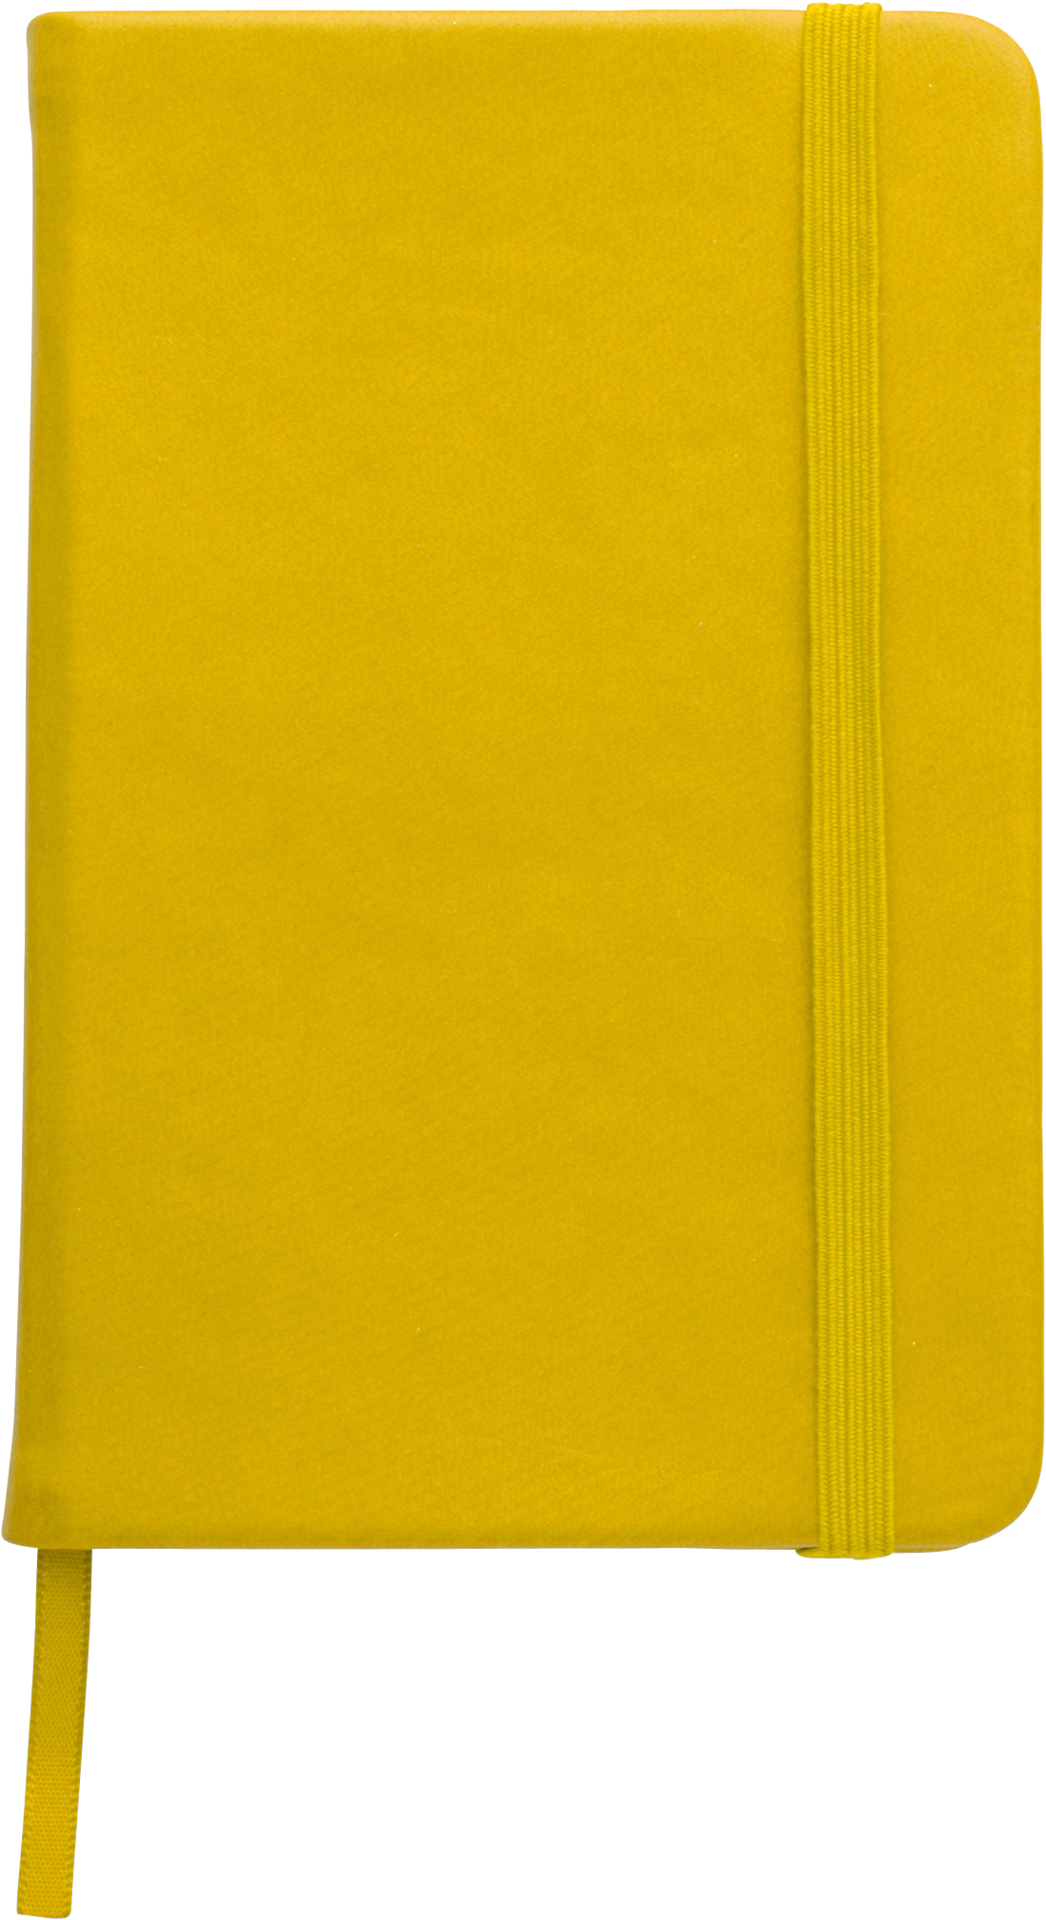 A6 Notebook with soft PU cover in yellow